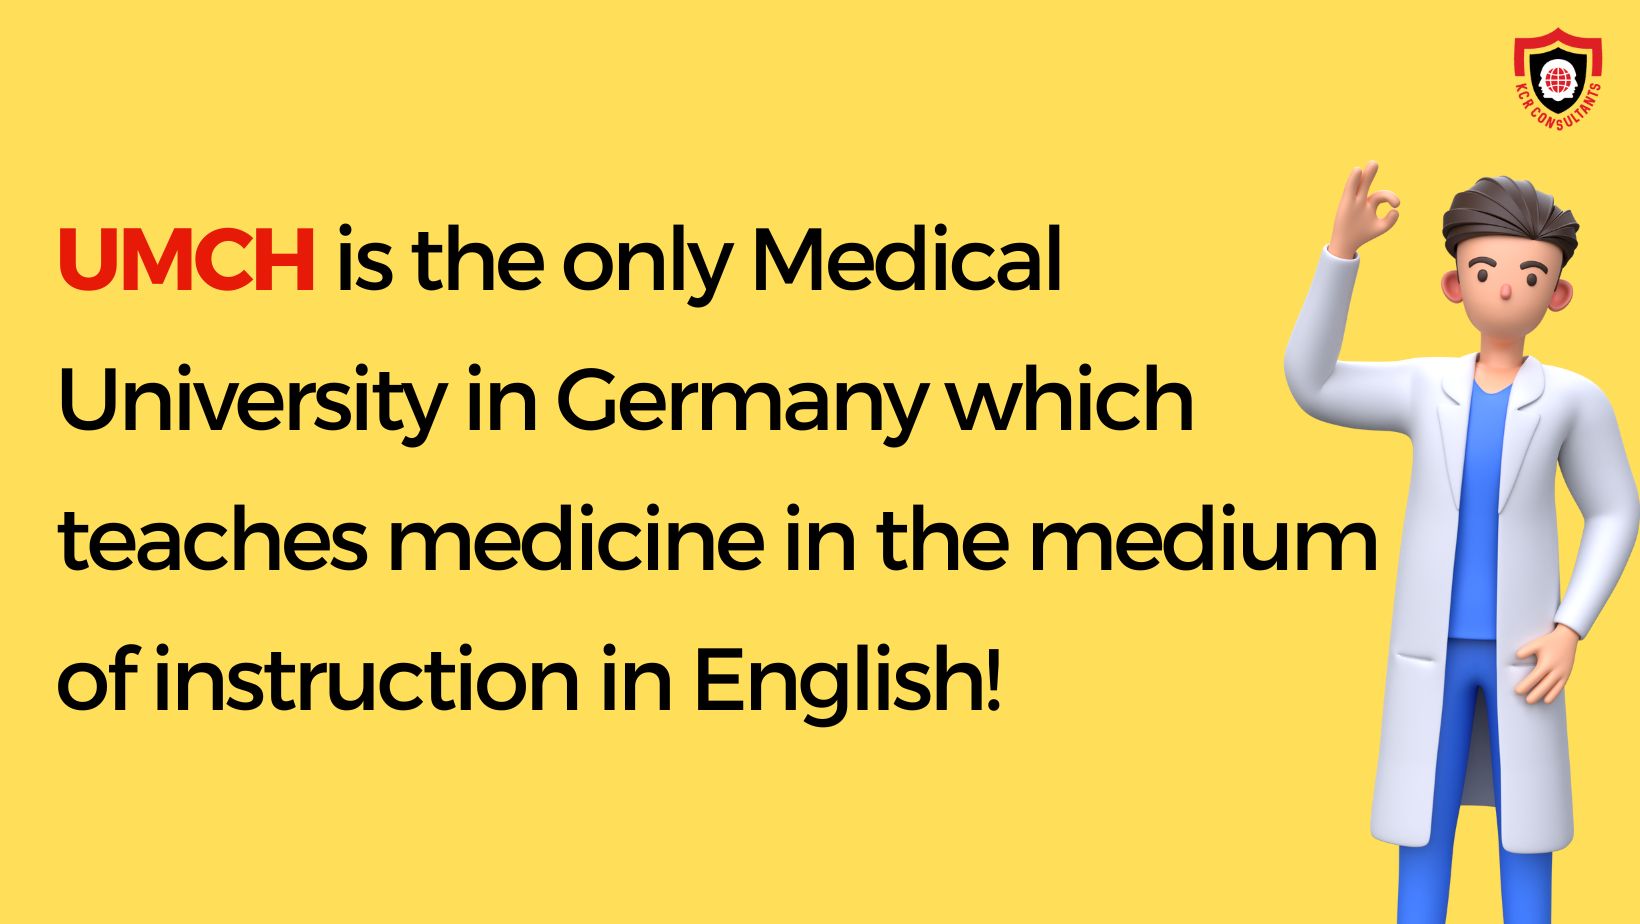 medicine in English in Germany at UMCH - Know more UMCH